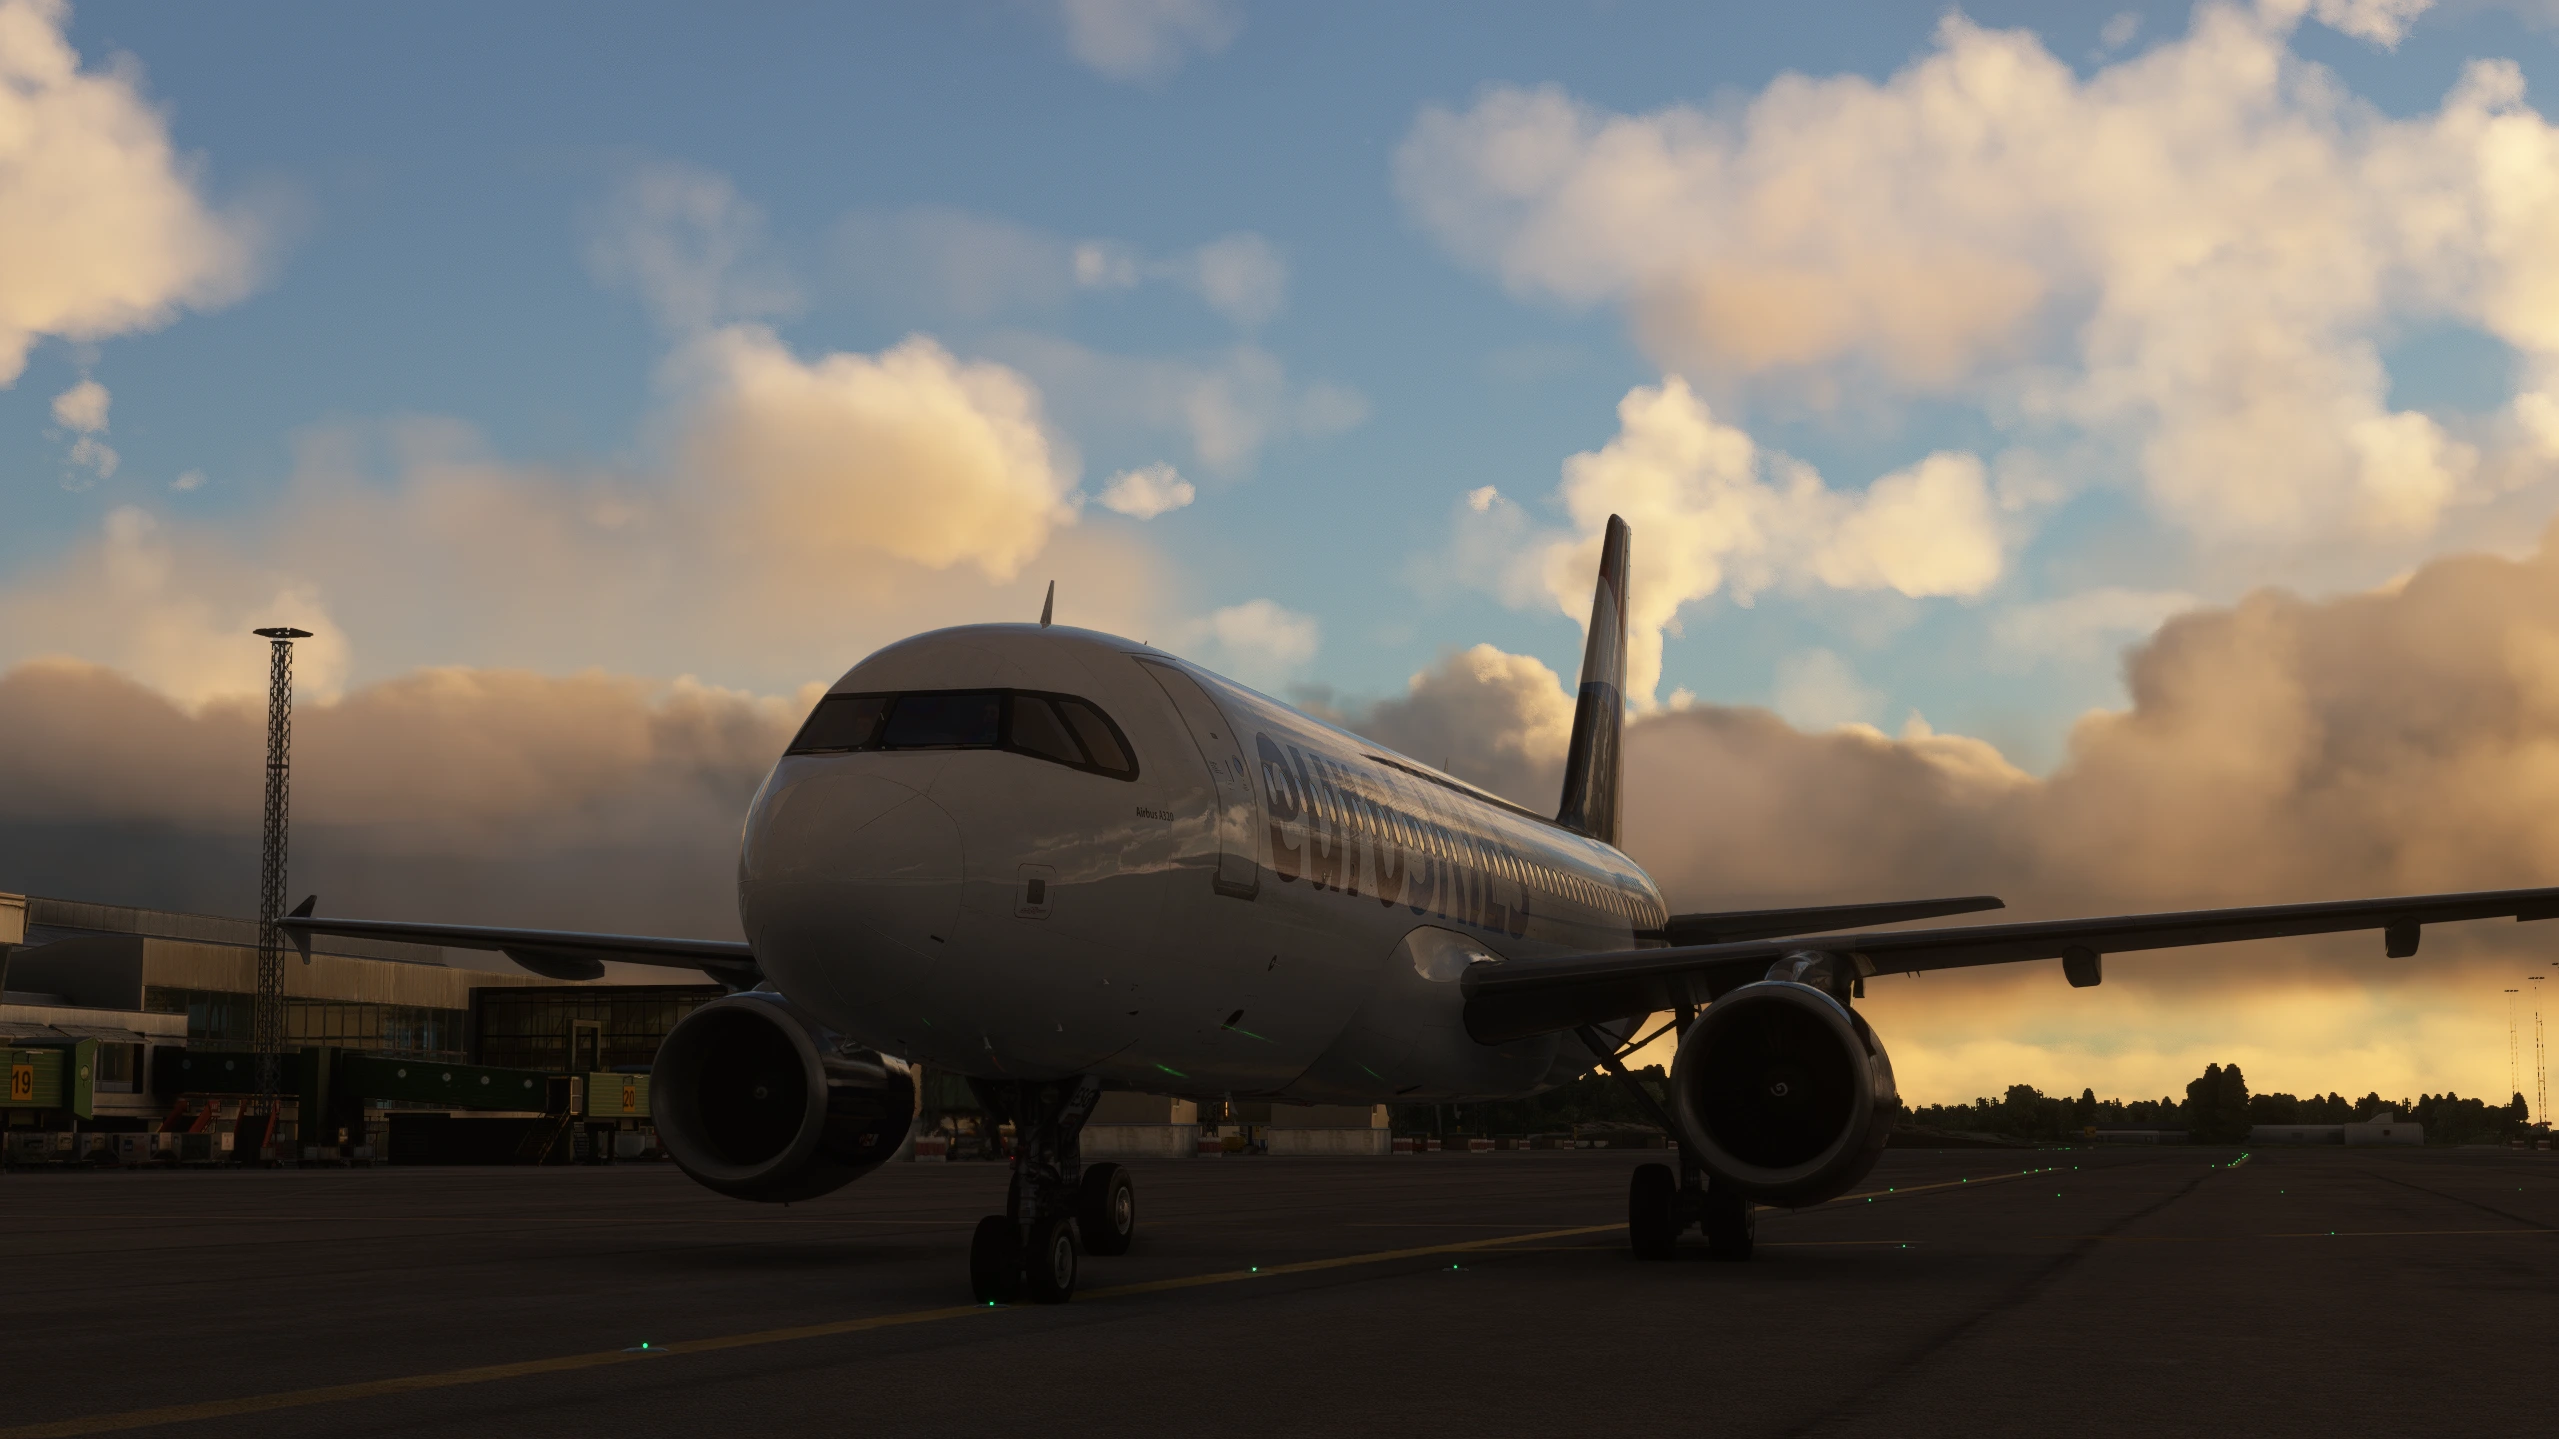 euroSKIES Airbus 320 in fair weather taxiing during sunset experience